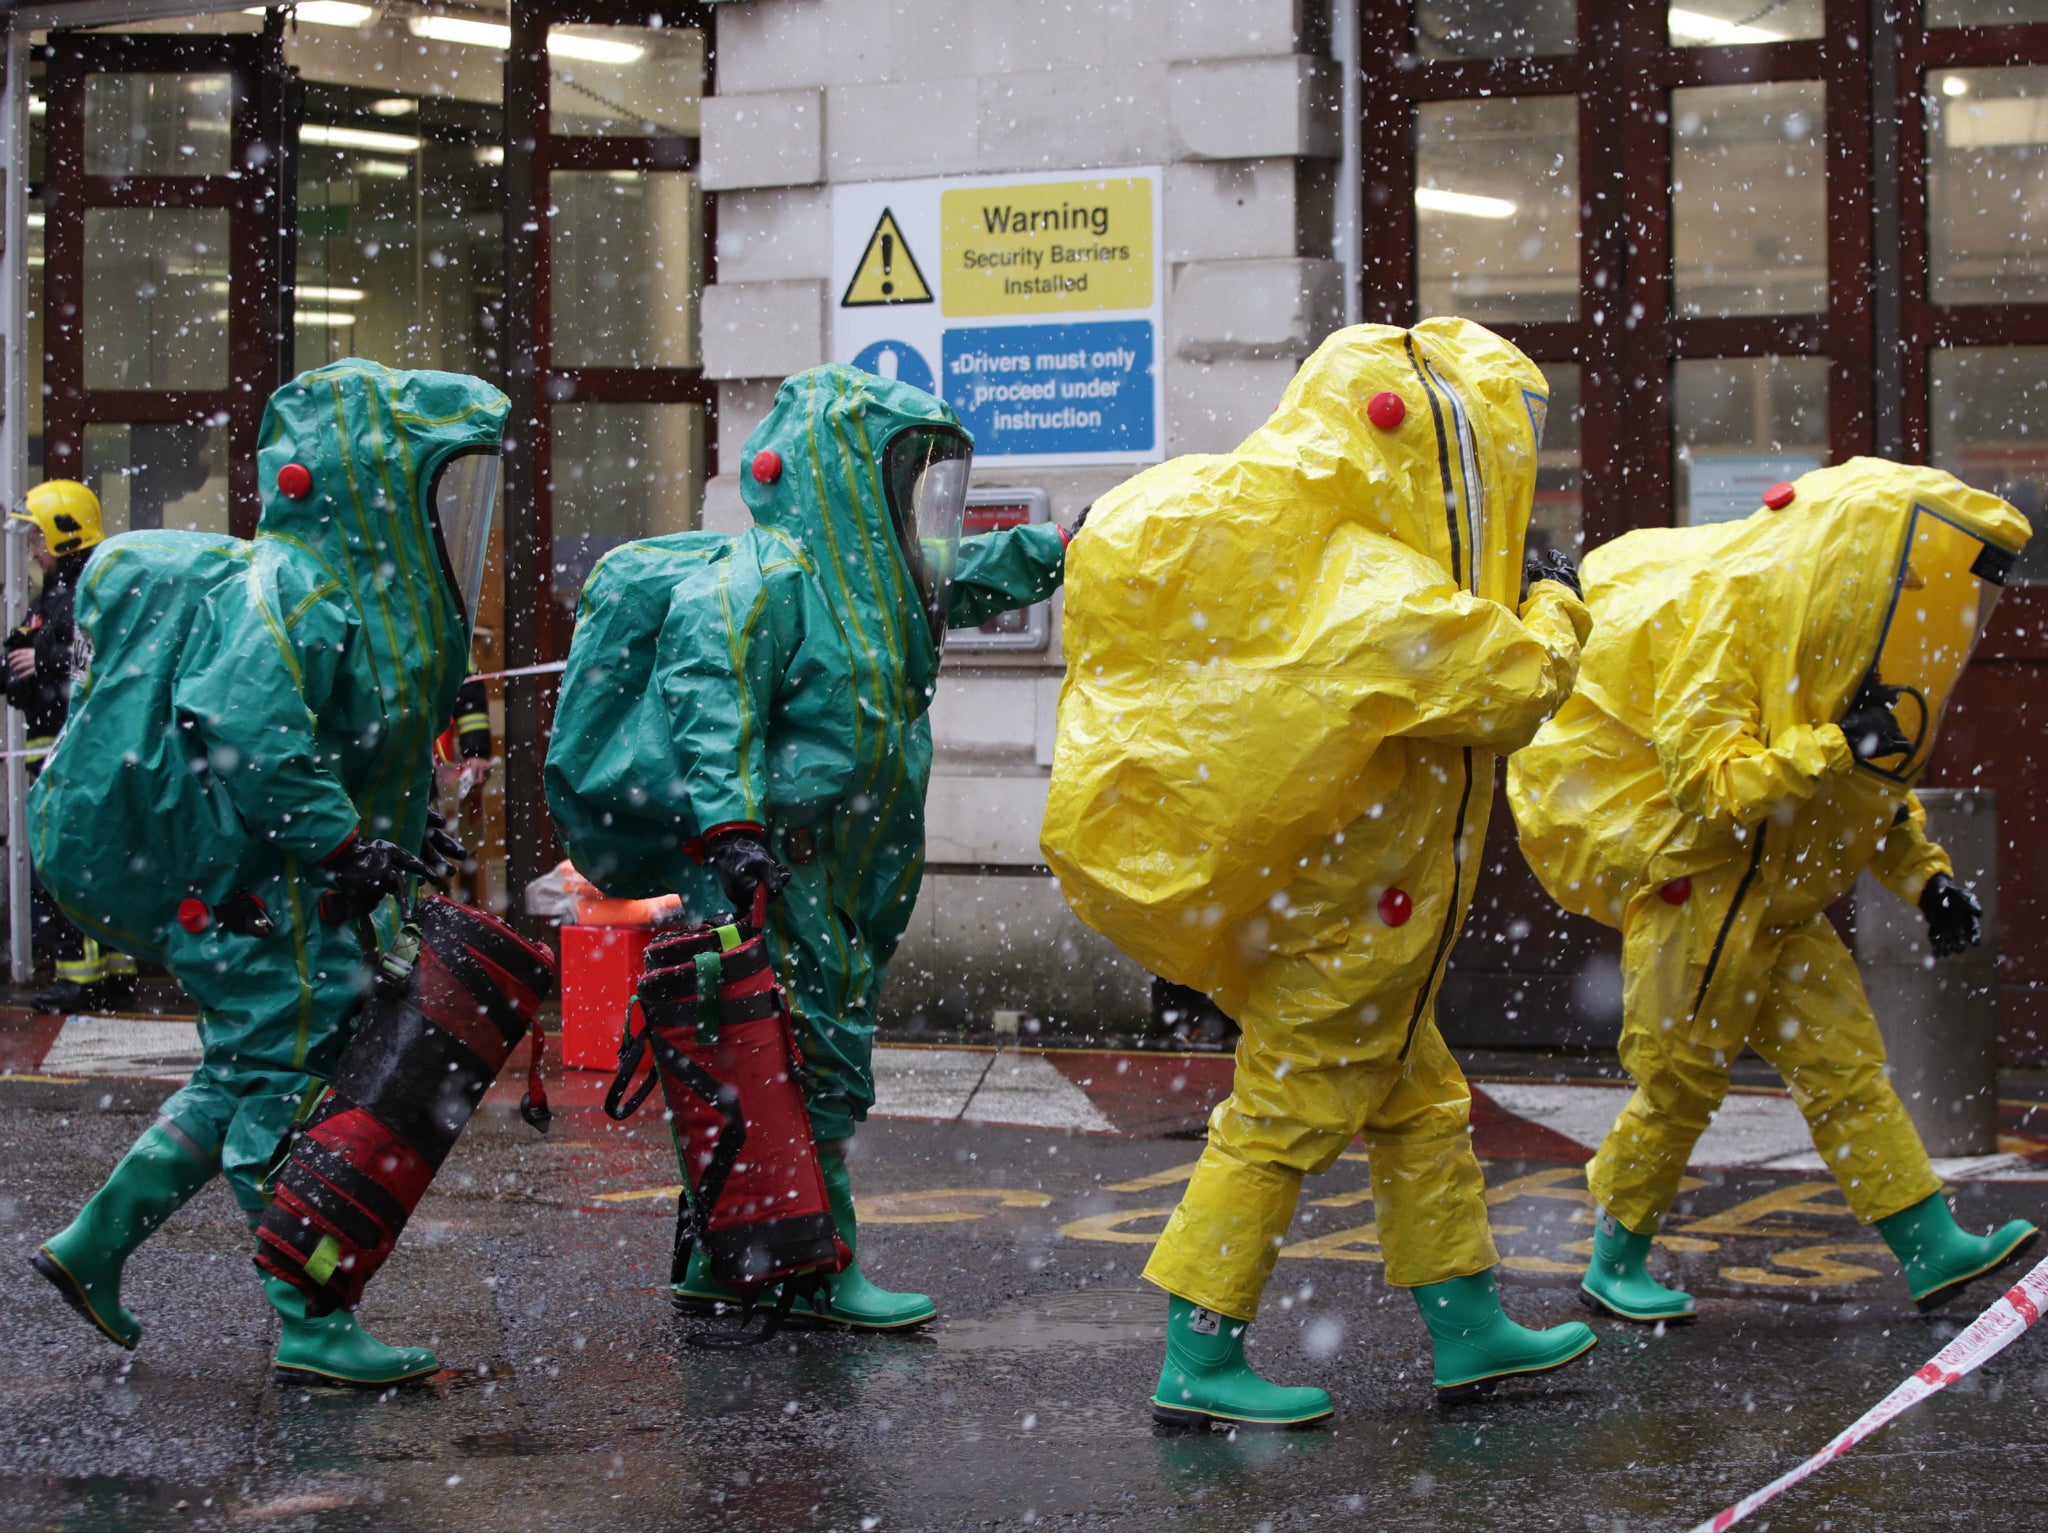 Members of the police, fire brigade and ambulance service during a joint exercise to test their response to an incident involving a hazardous substance at the Israeli Embassy in Kensington, London.